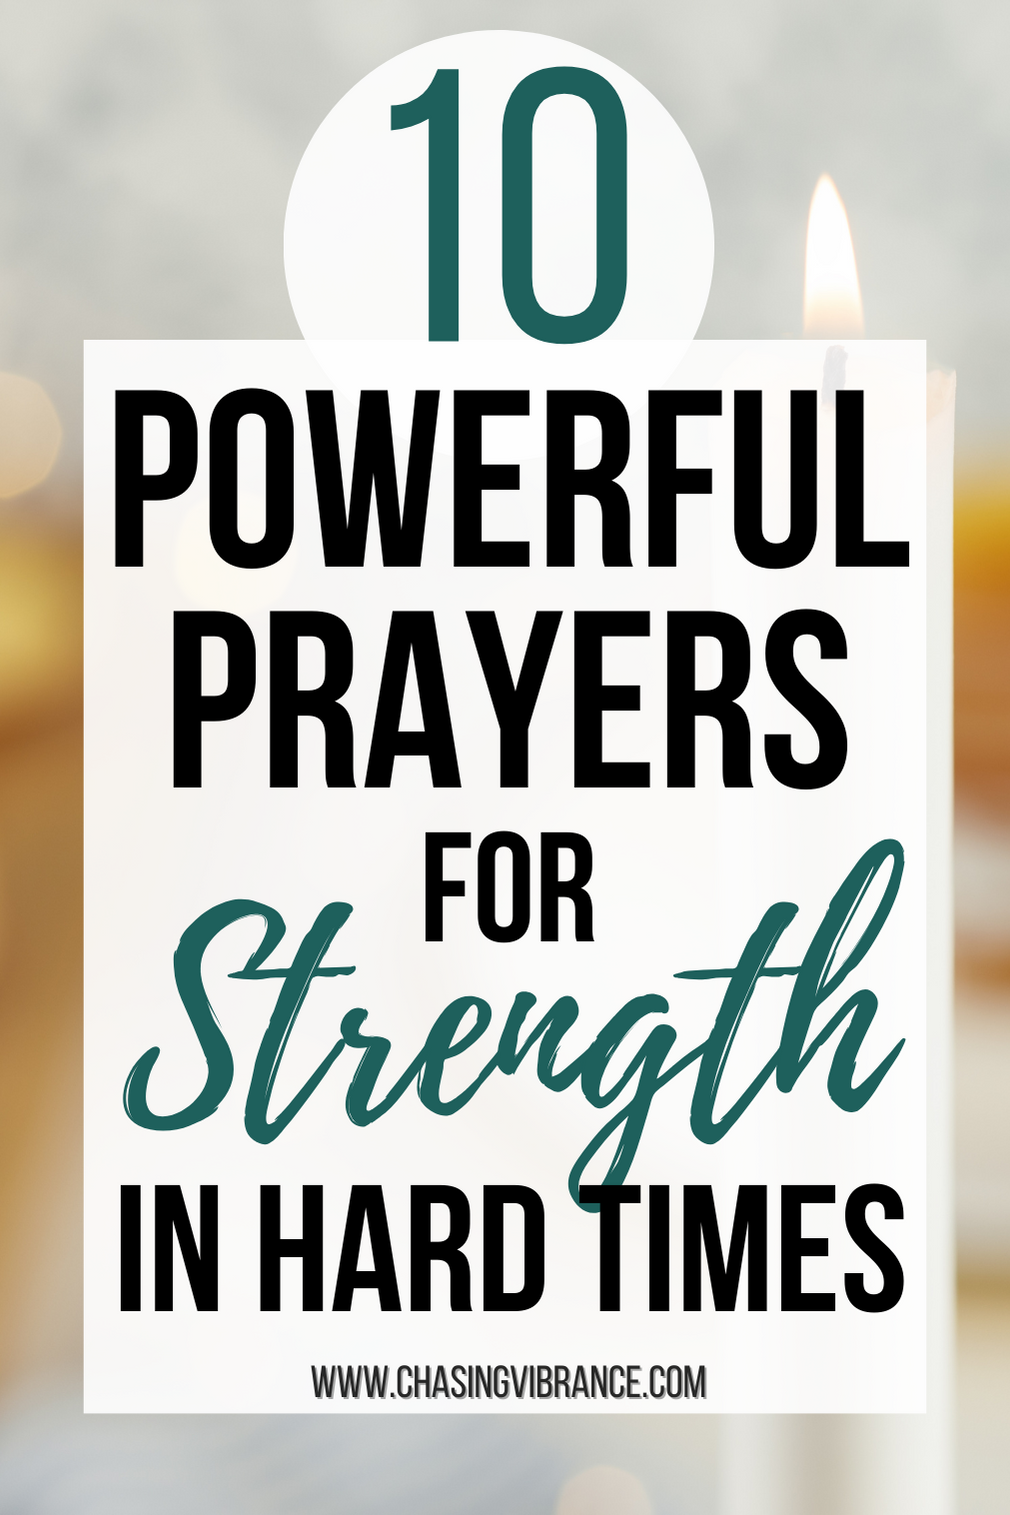 10 Powerful Prayers for Strength During Difficult Times